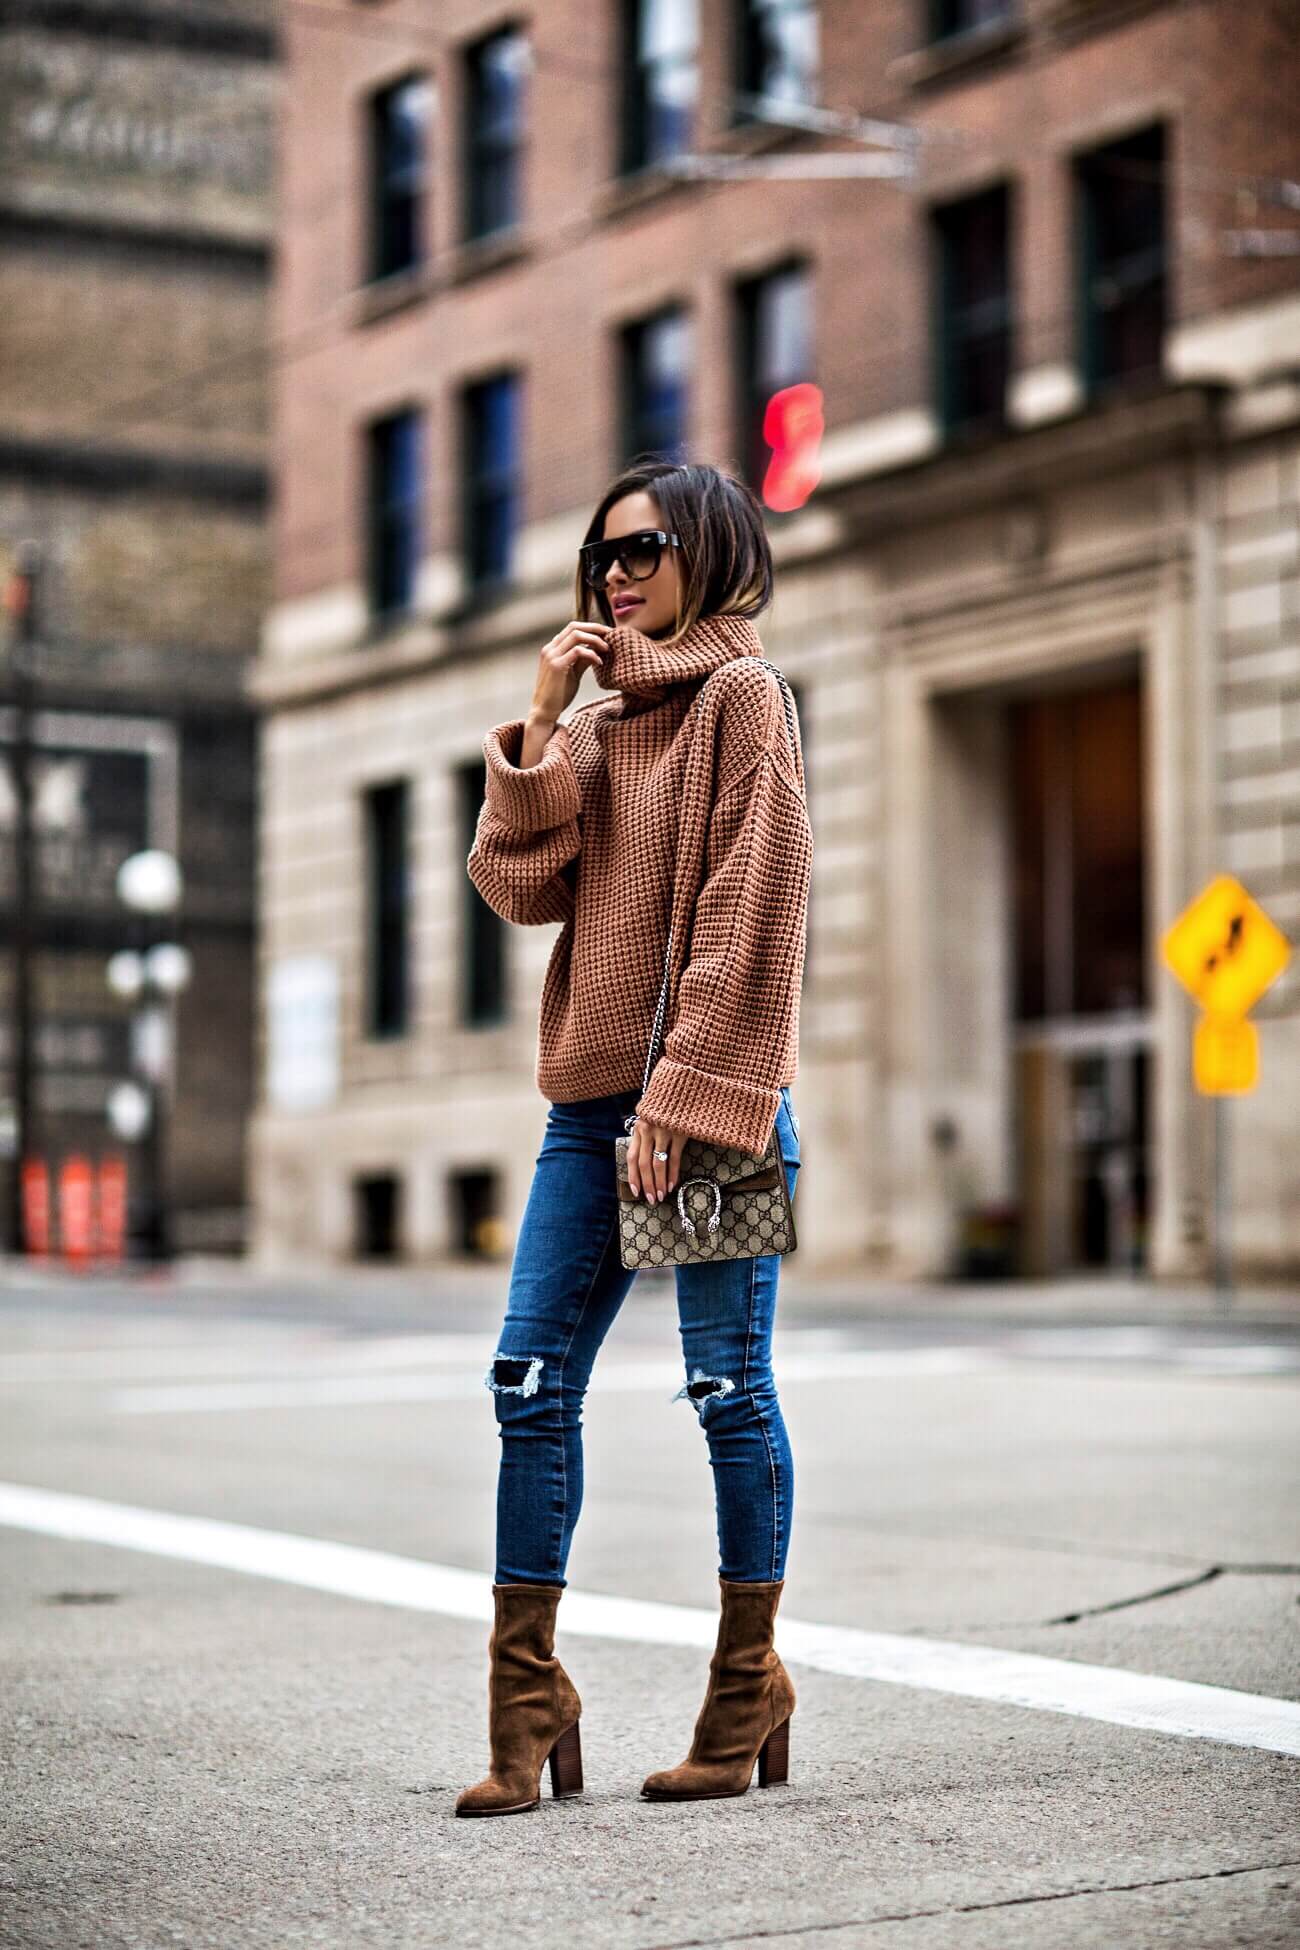 fashion blogger mia mia mine wearing an orange sweater by free people and a gucci dionysus bag